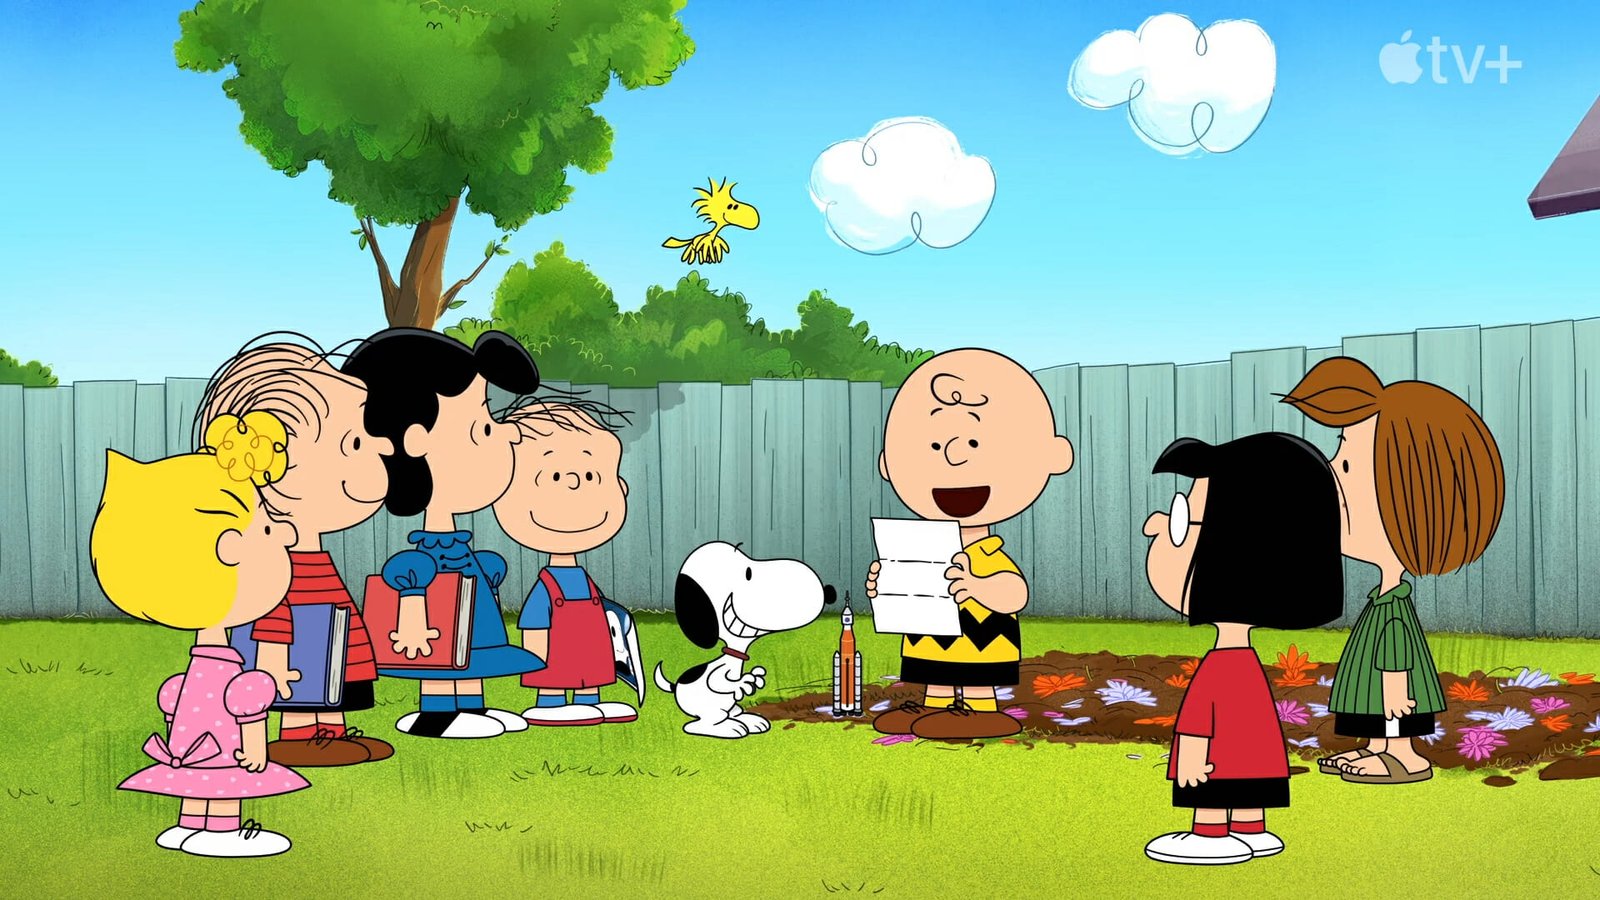 Best tv shows on apple tv: The Snoopy Show and Snoopy in Space